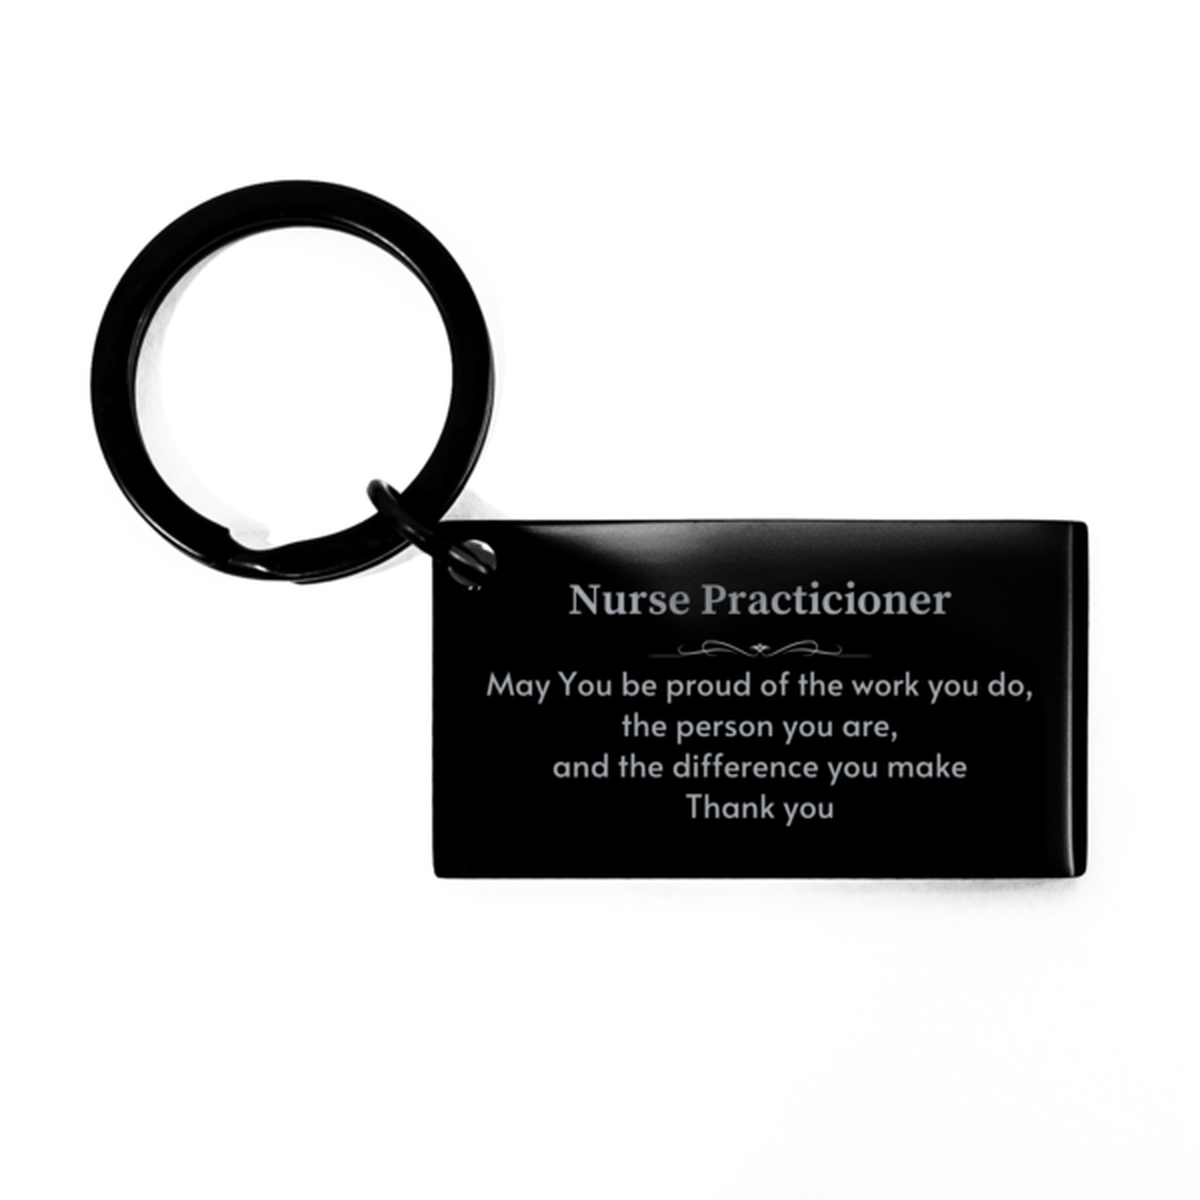 Heartwarming Keychain Retirement Coworkers Gifts for Nurse Practicioner, Personal Trainer May You be proud of the work you do, the person you are Gifts for Boss Men Women Friends